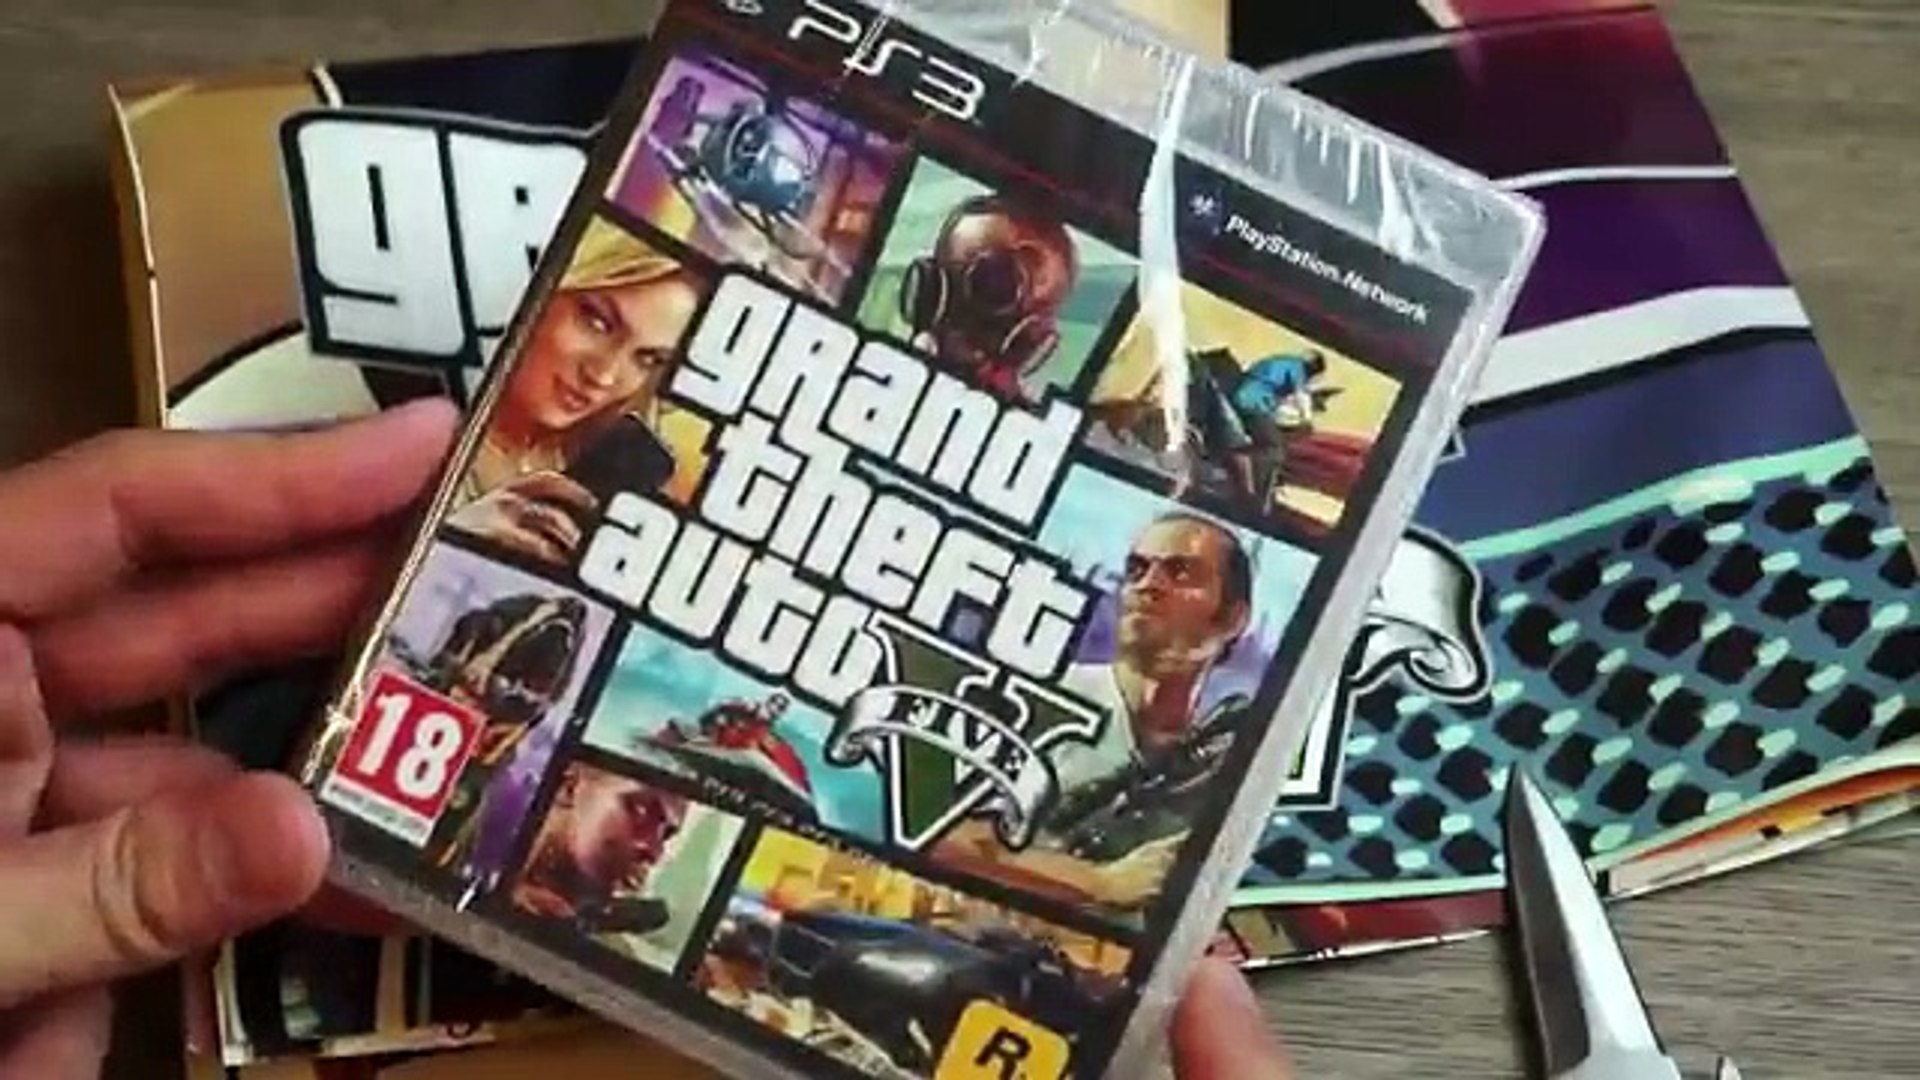 GTA 5 Limited Edition PS3 Unboxing and Game Play Demo - video Dailymotion